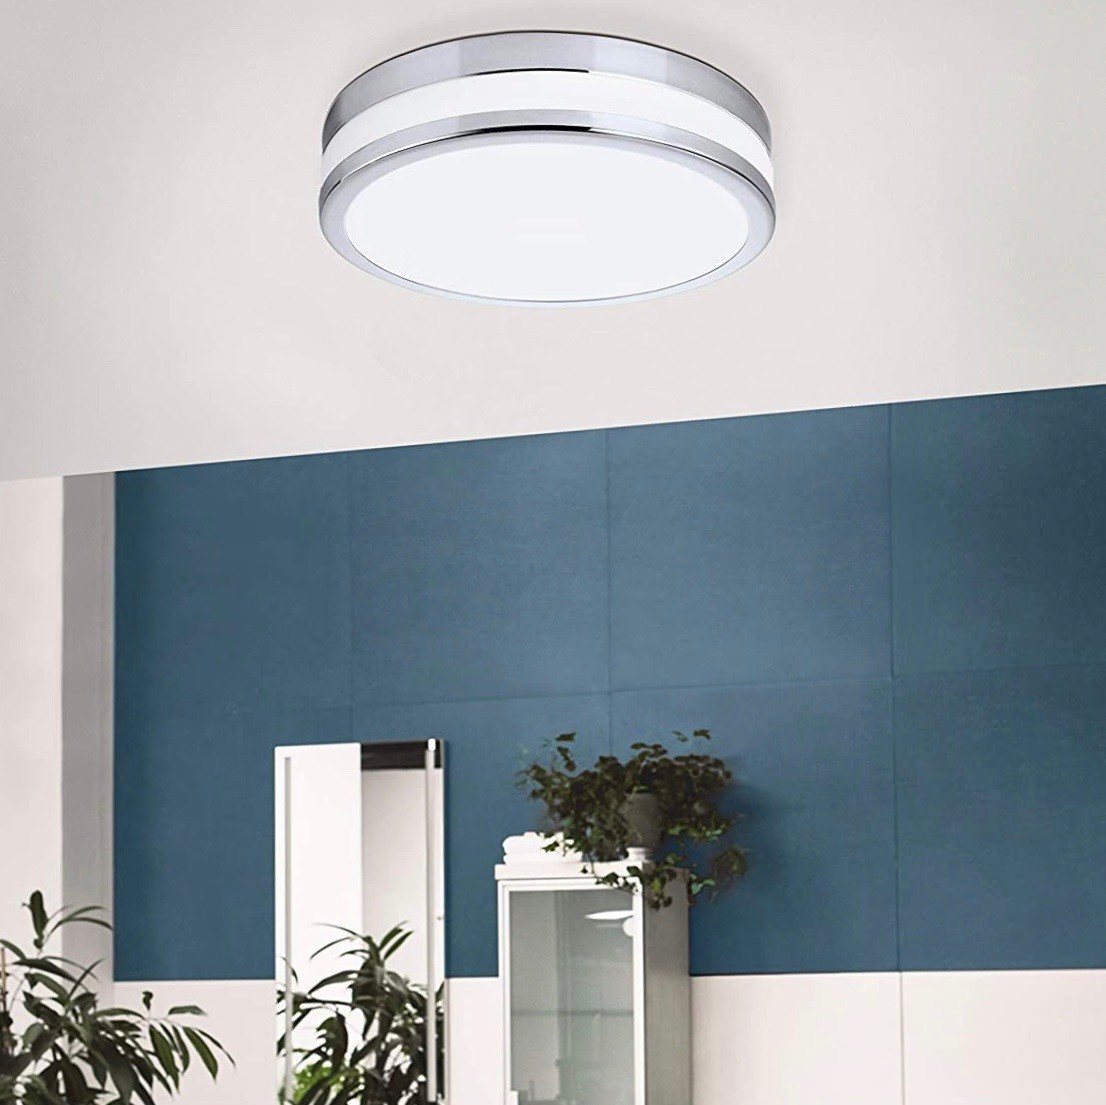 122,95 € Free Shipping | Indoor ceiling light Eglo 24W 3000K Warm light. Ø 29 cm. LED Steel and glass. Plated chrome Color